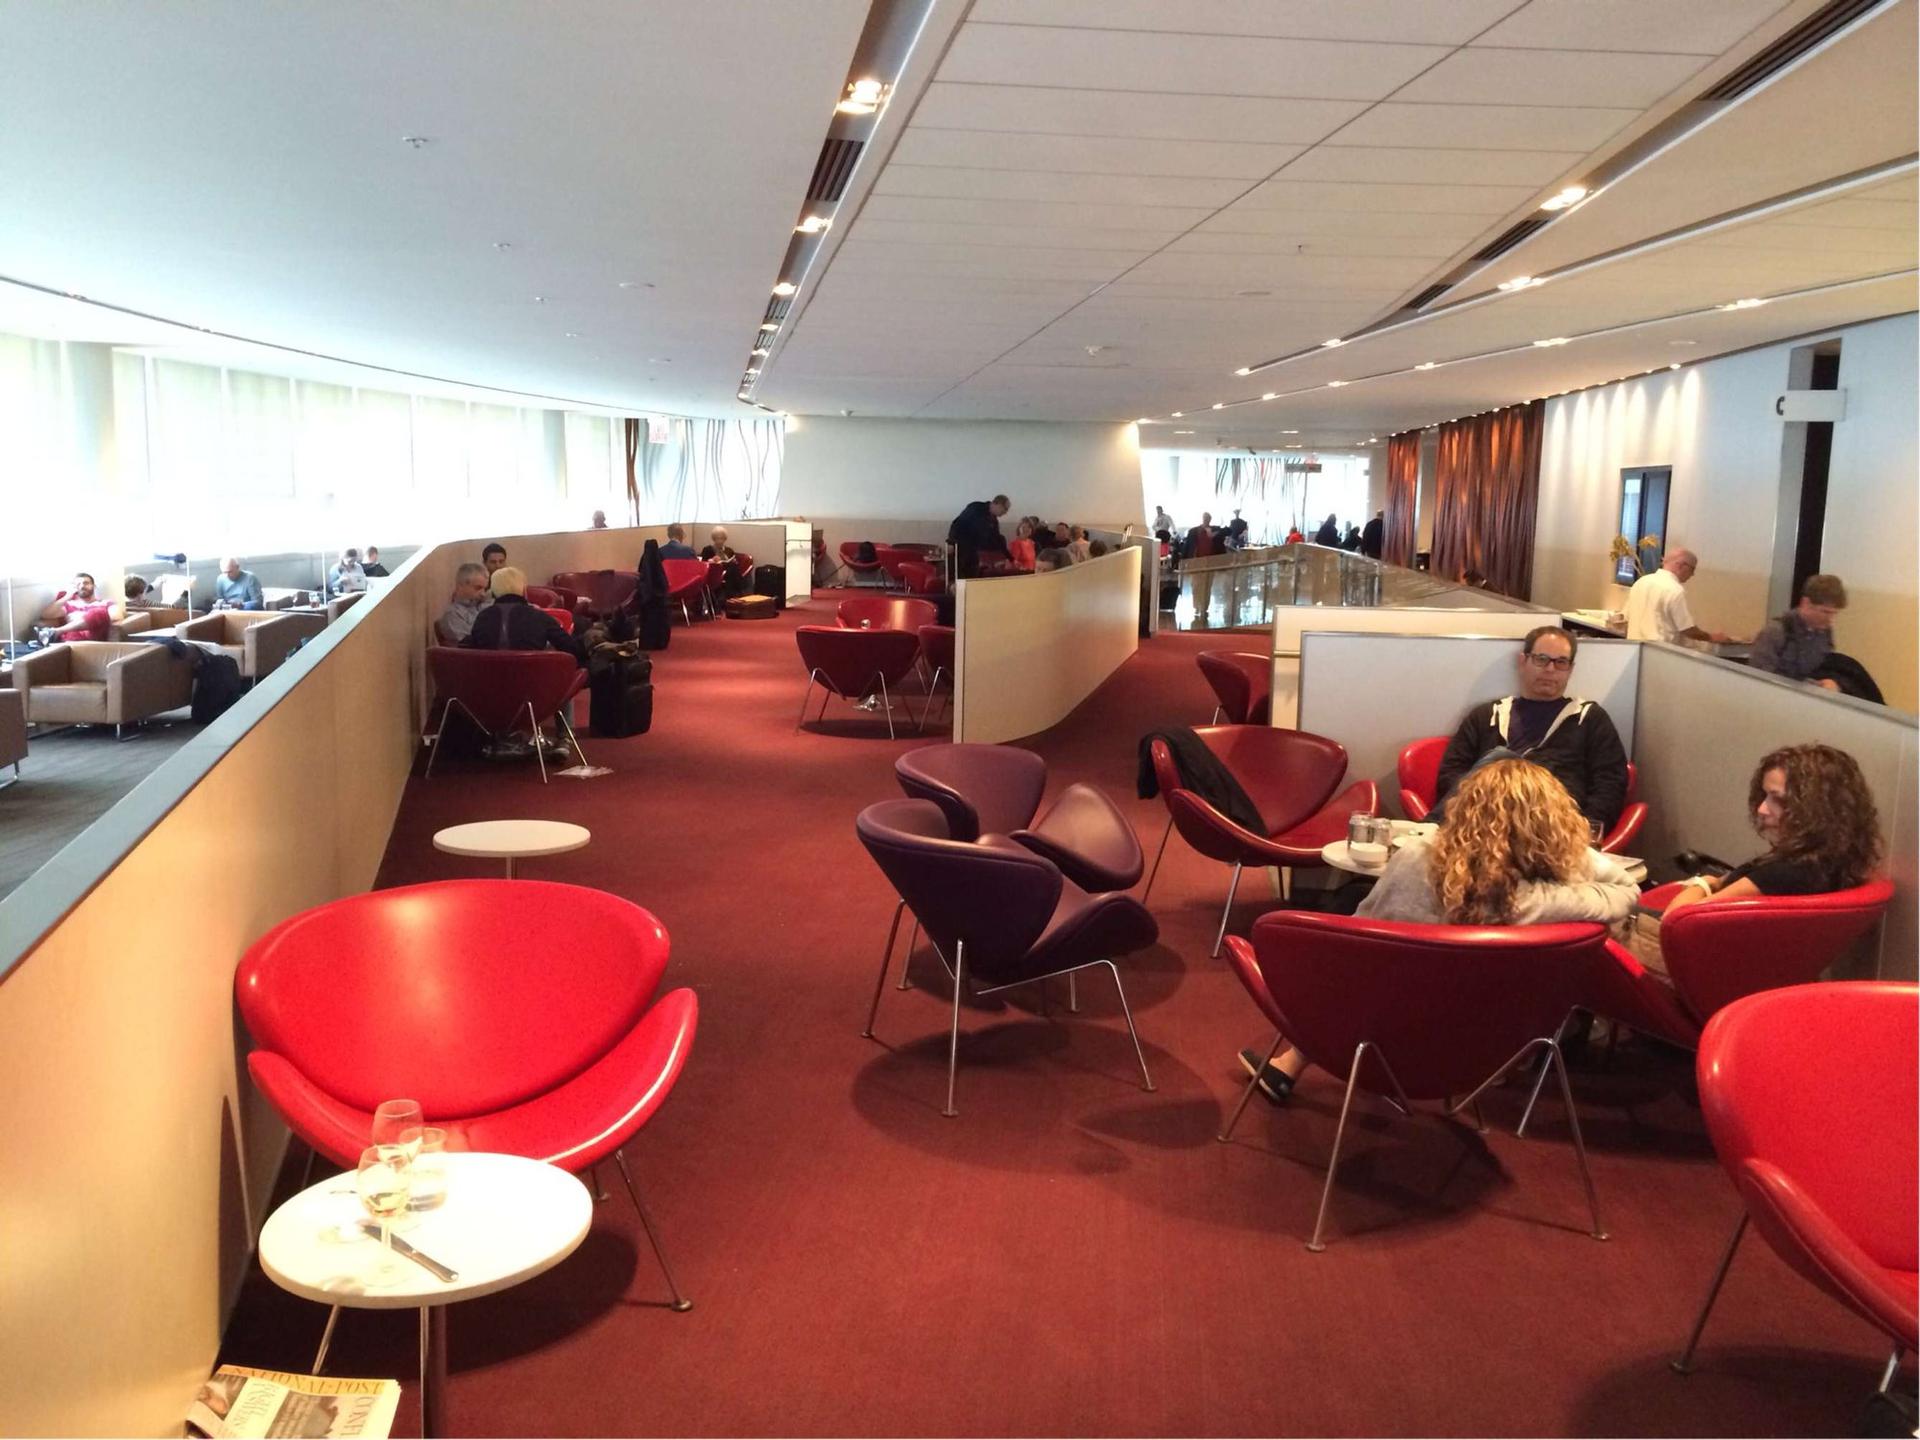 Air Canada Maple Leaf Lounge image 27 of 30